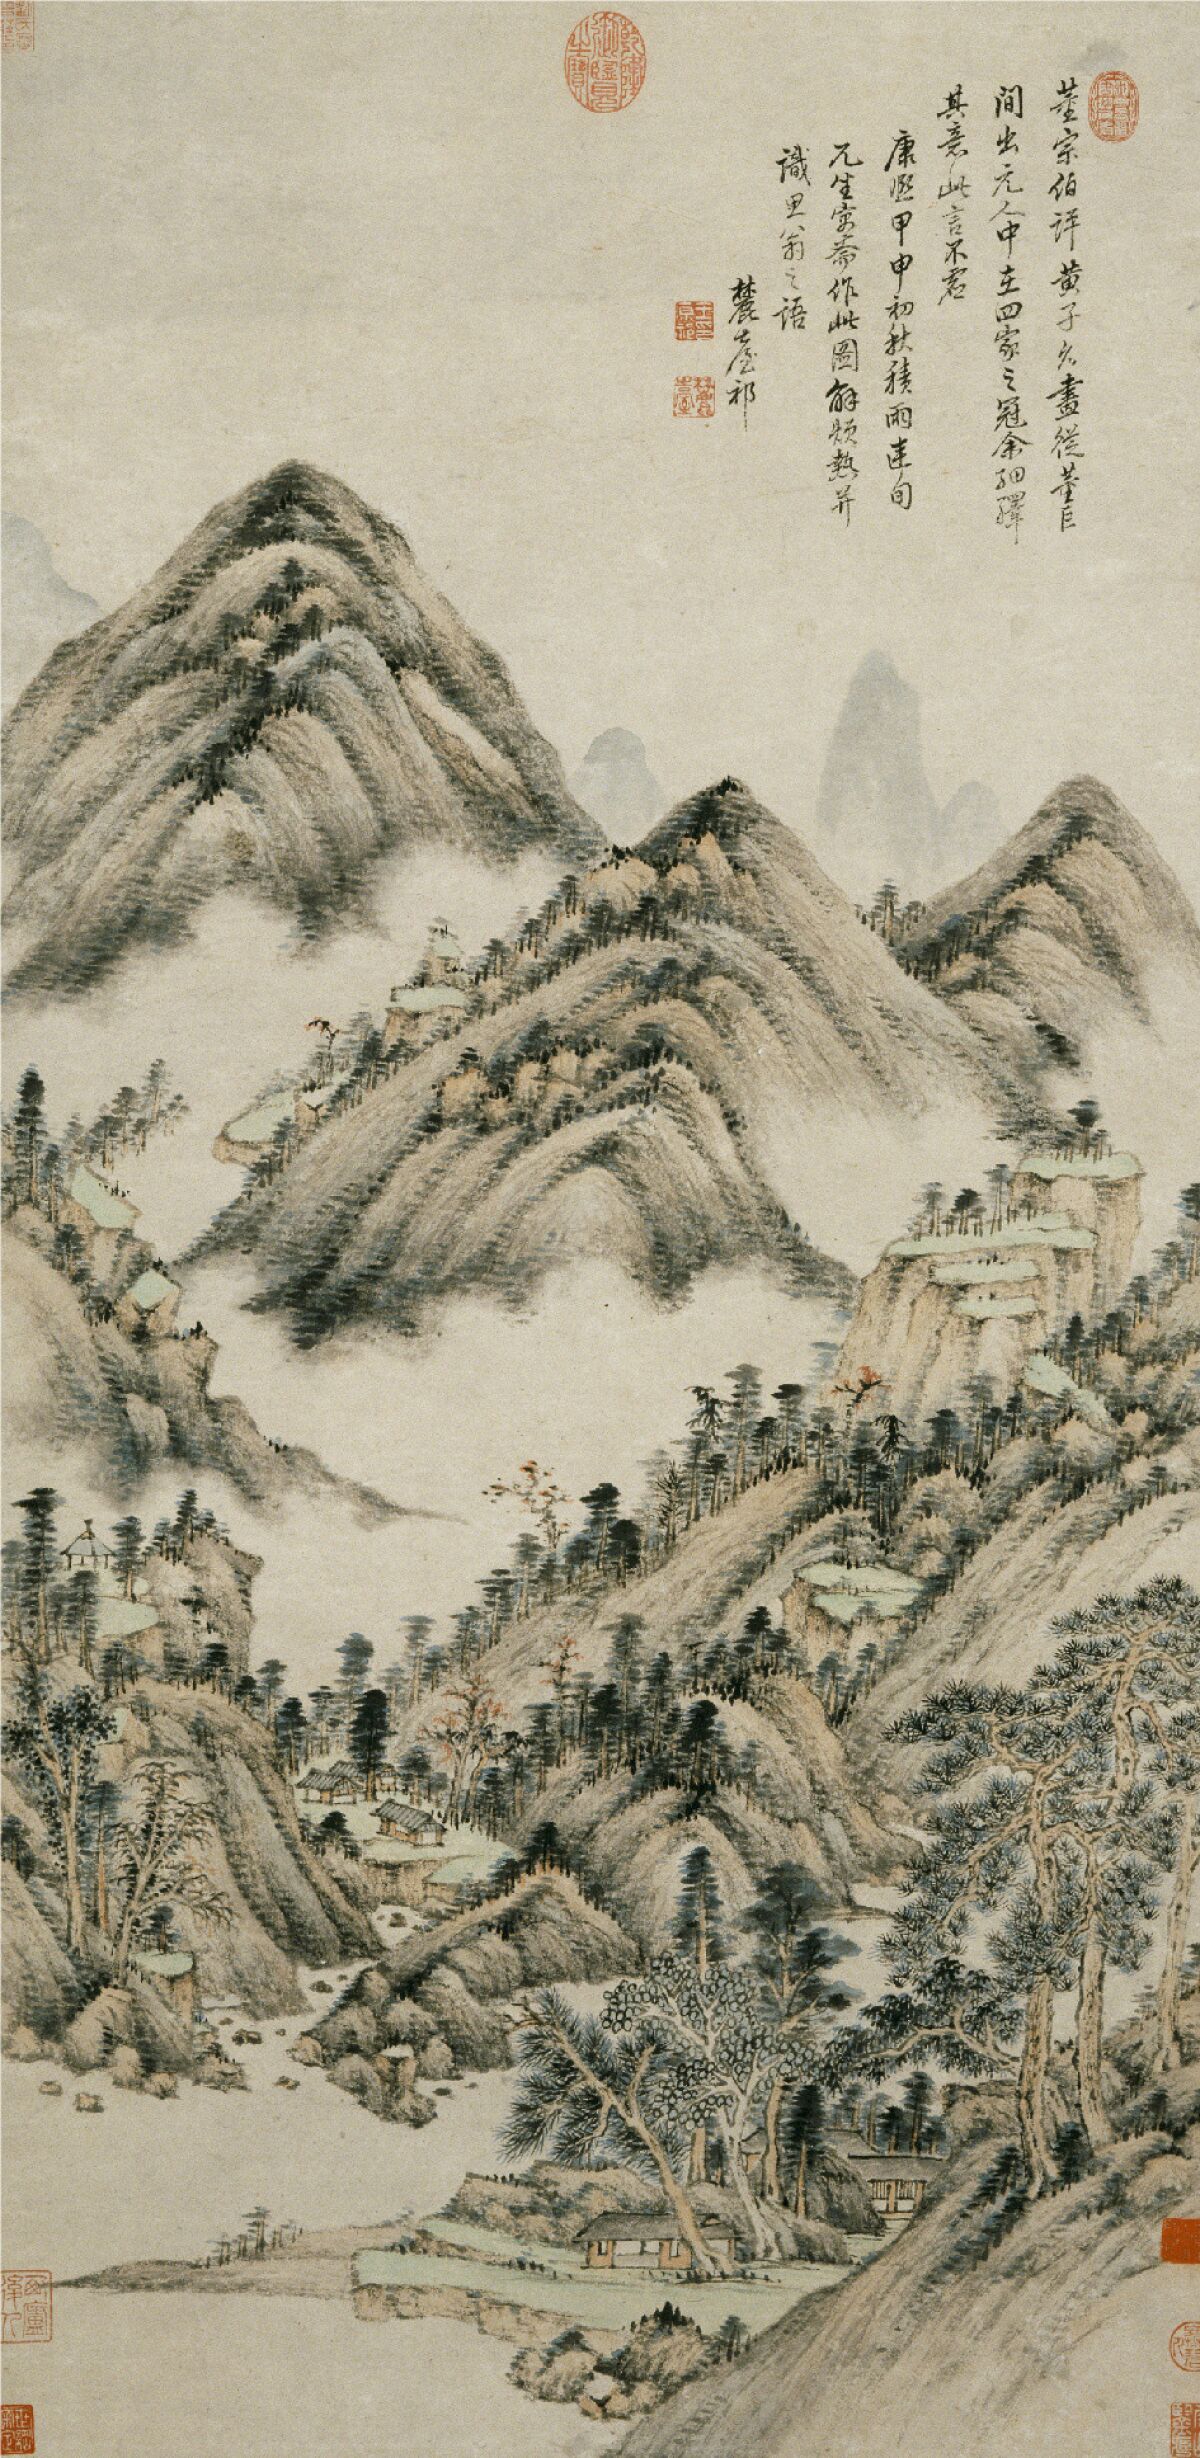 Wang Yuanqi, "Landscape in the Style of Huang Gongwang," 1704, ink on paper (LACMA)